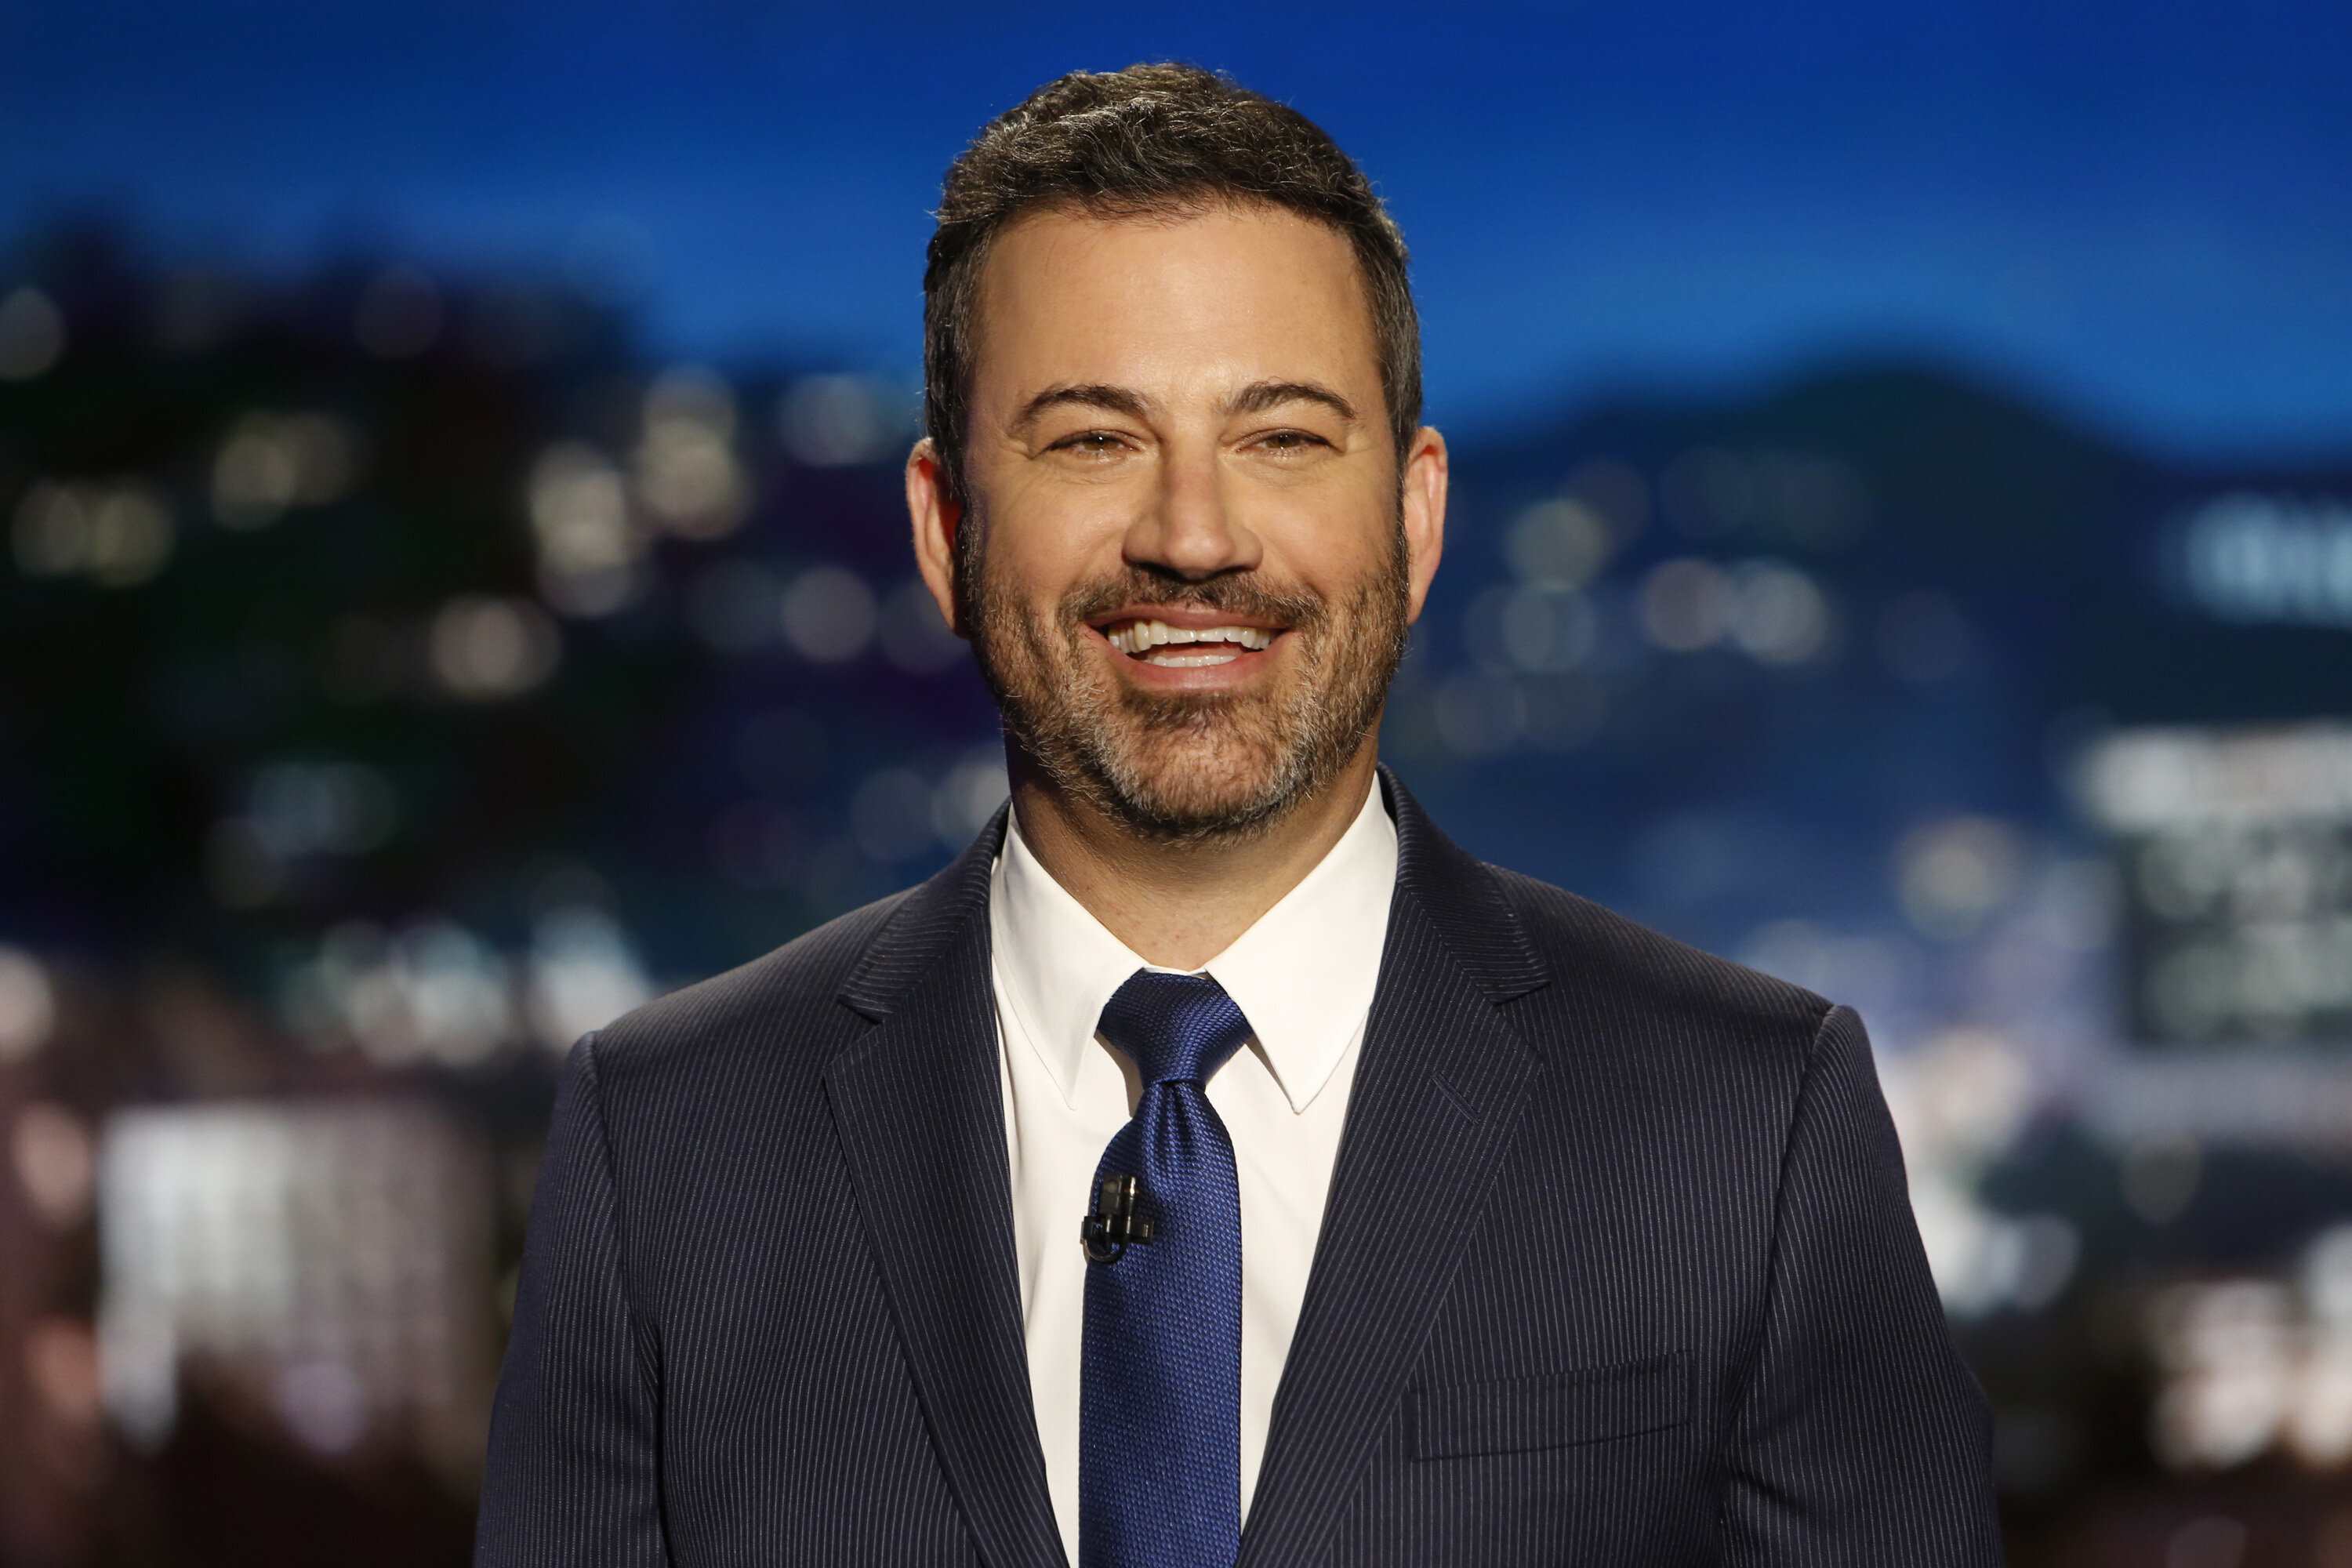 A Jimmy Kimmel Sketch About Trump Just Cost ABC $395,000